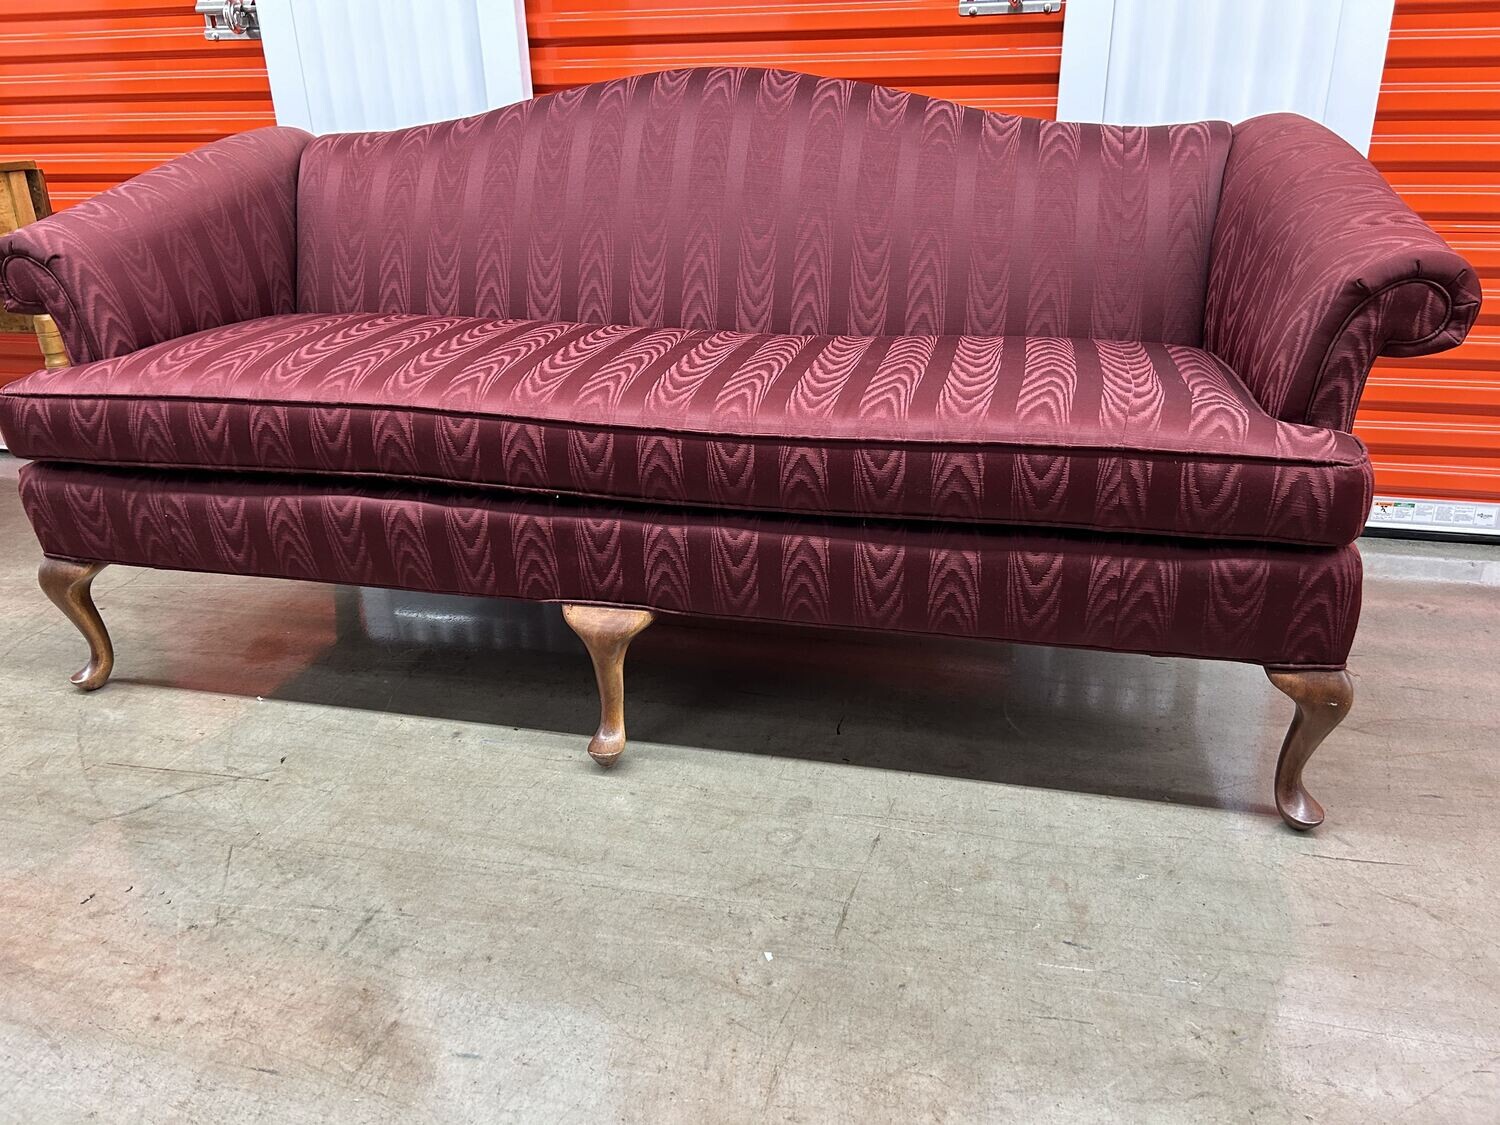 Victorian style Camel-back Sofa, burgundy #2126 ** 10 days to sell, full price